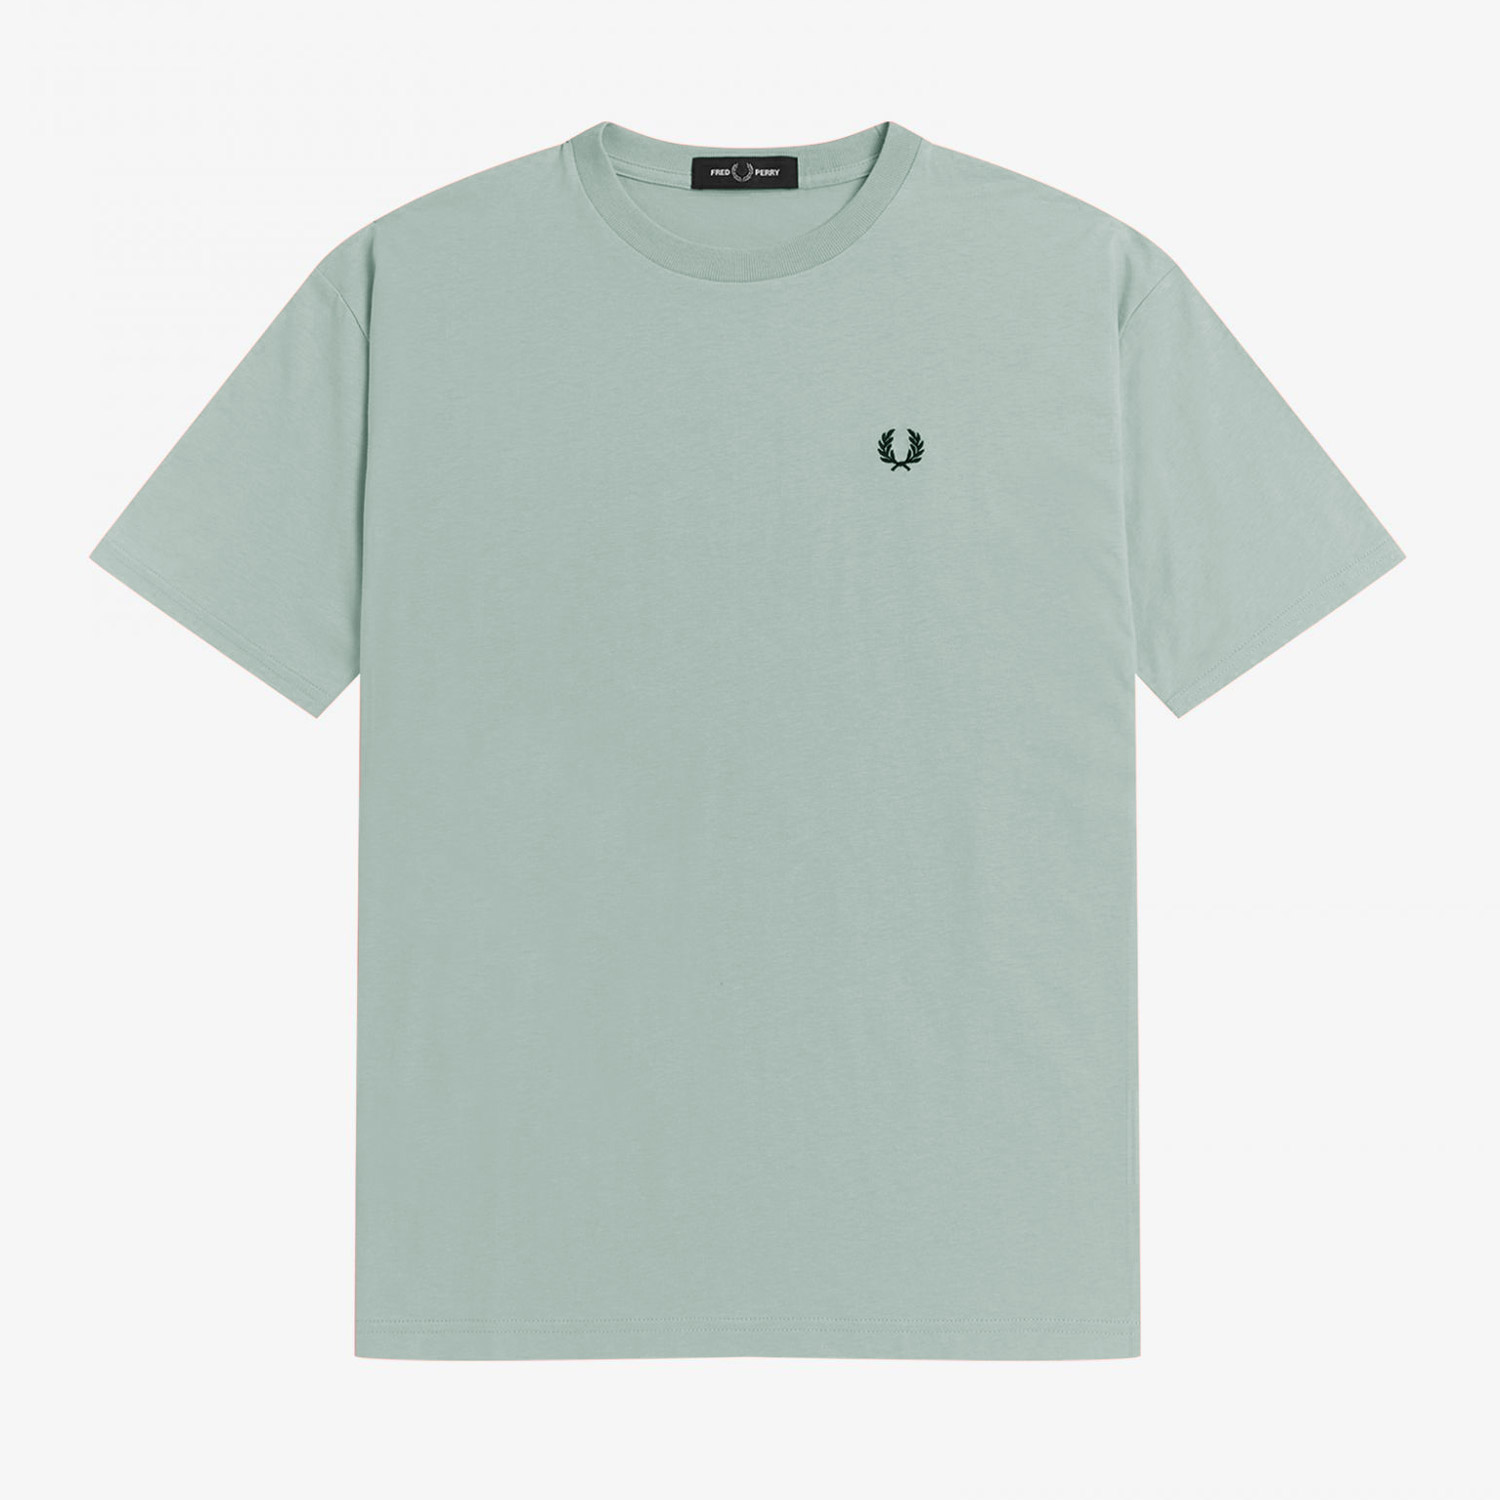 Fred Perry Women's Crew Neck Tee - Silver Blue